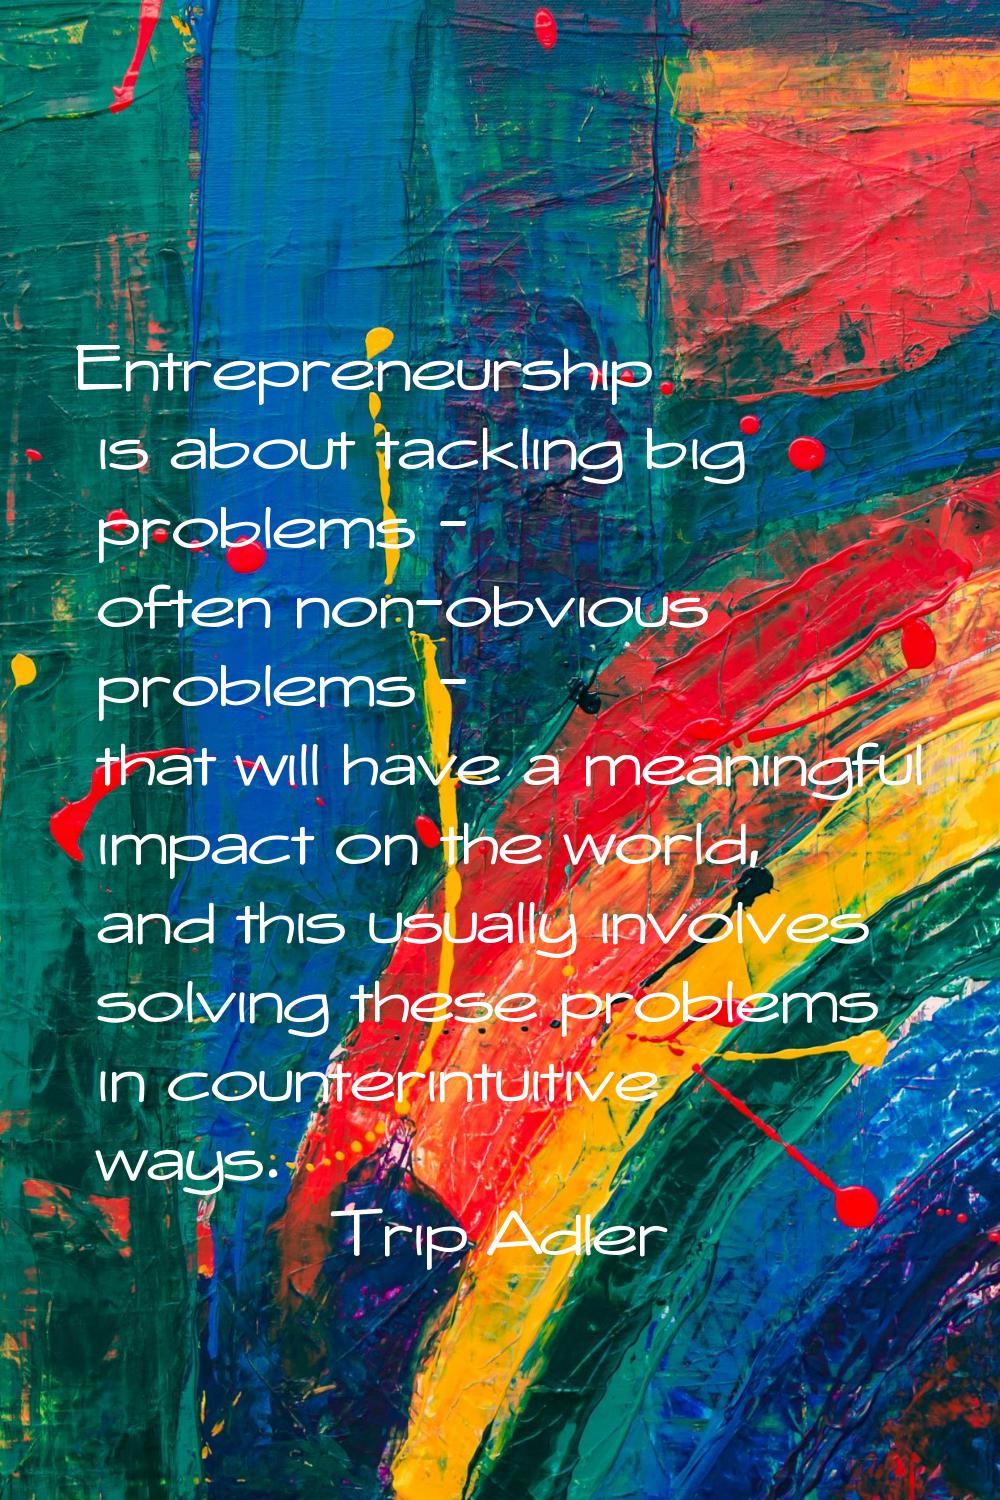 Entrepreneurship is about tackling big problems - often non-obvious problems - that will have a mea